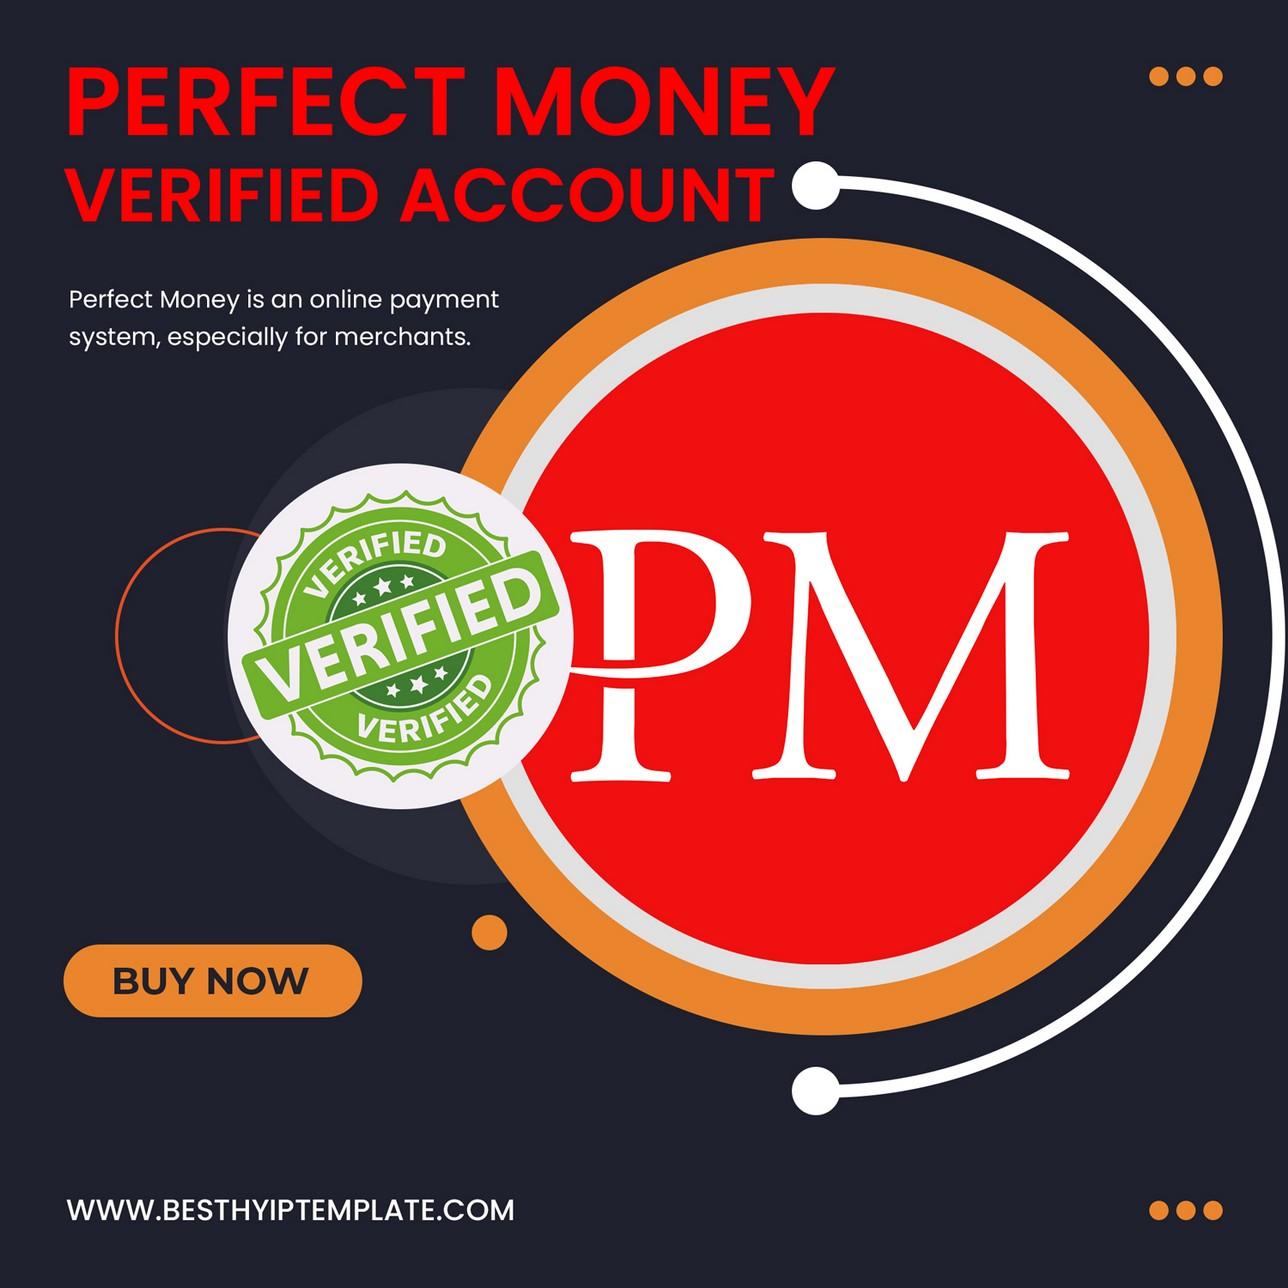 Perfect Money: The Truth about the Payment System – BestChange project blog